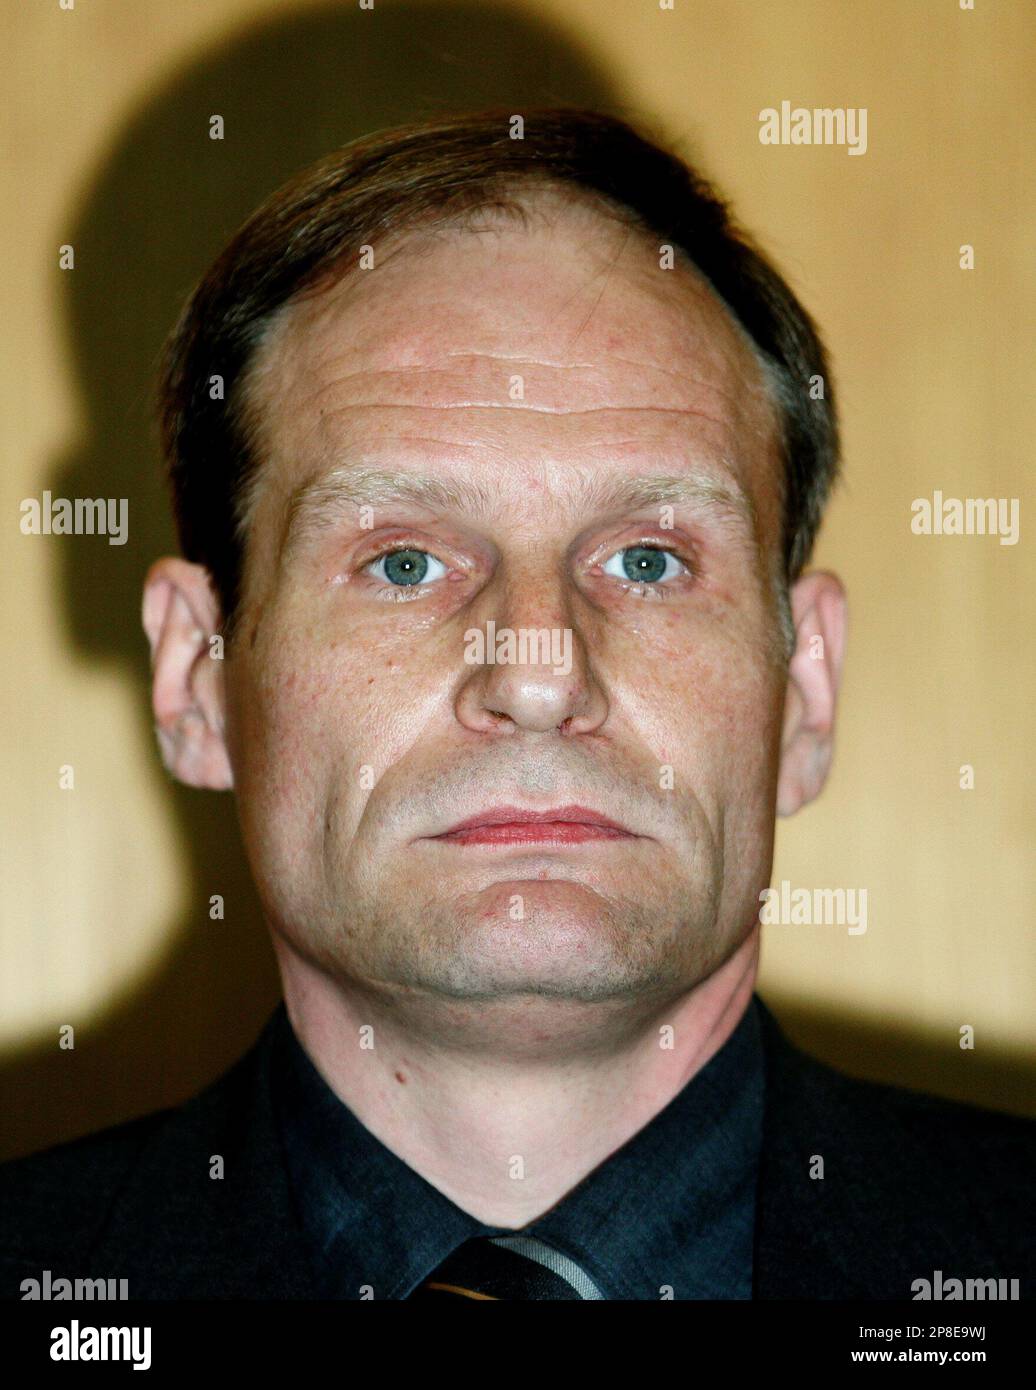 FILE - In this May 9, 2006 file photo Armin Meiwes, who was convicted ...